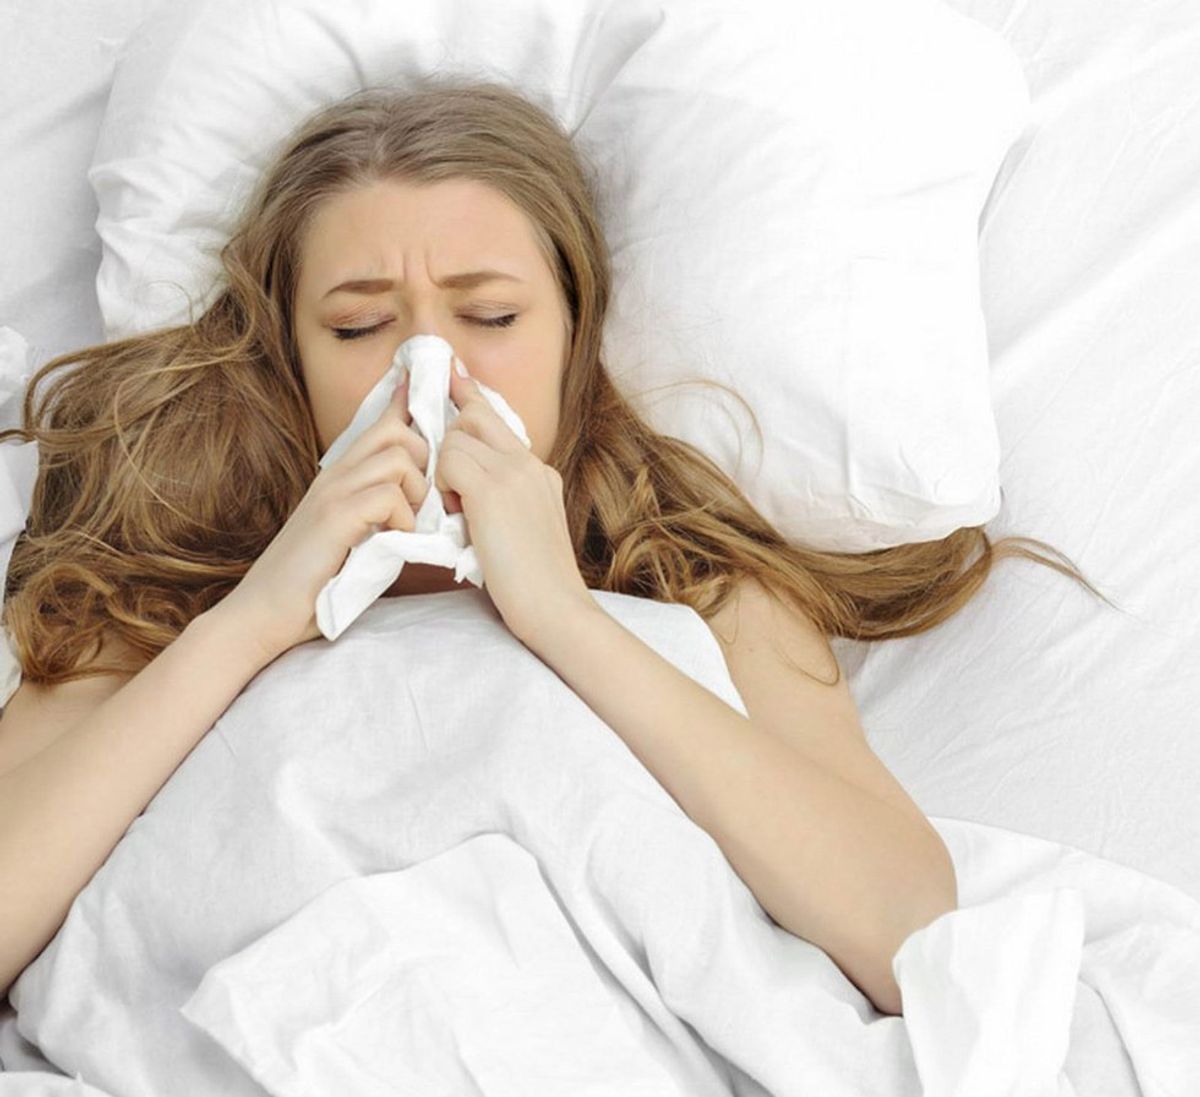 How To Survive Having The Flu At College